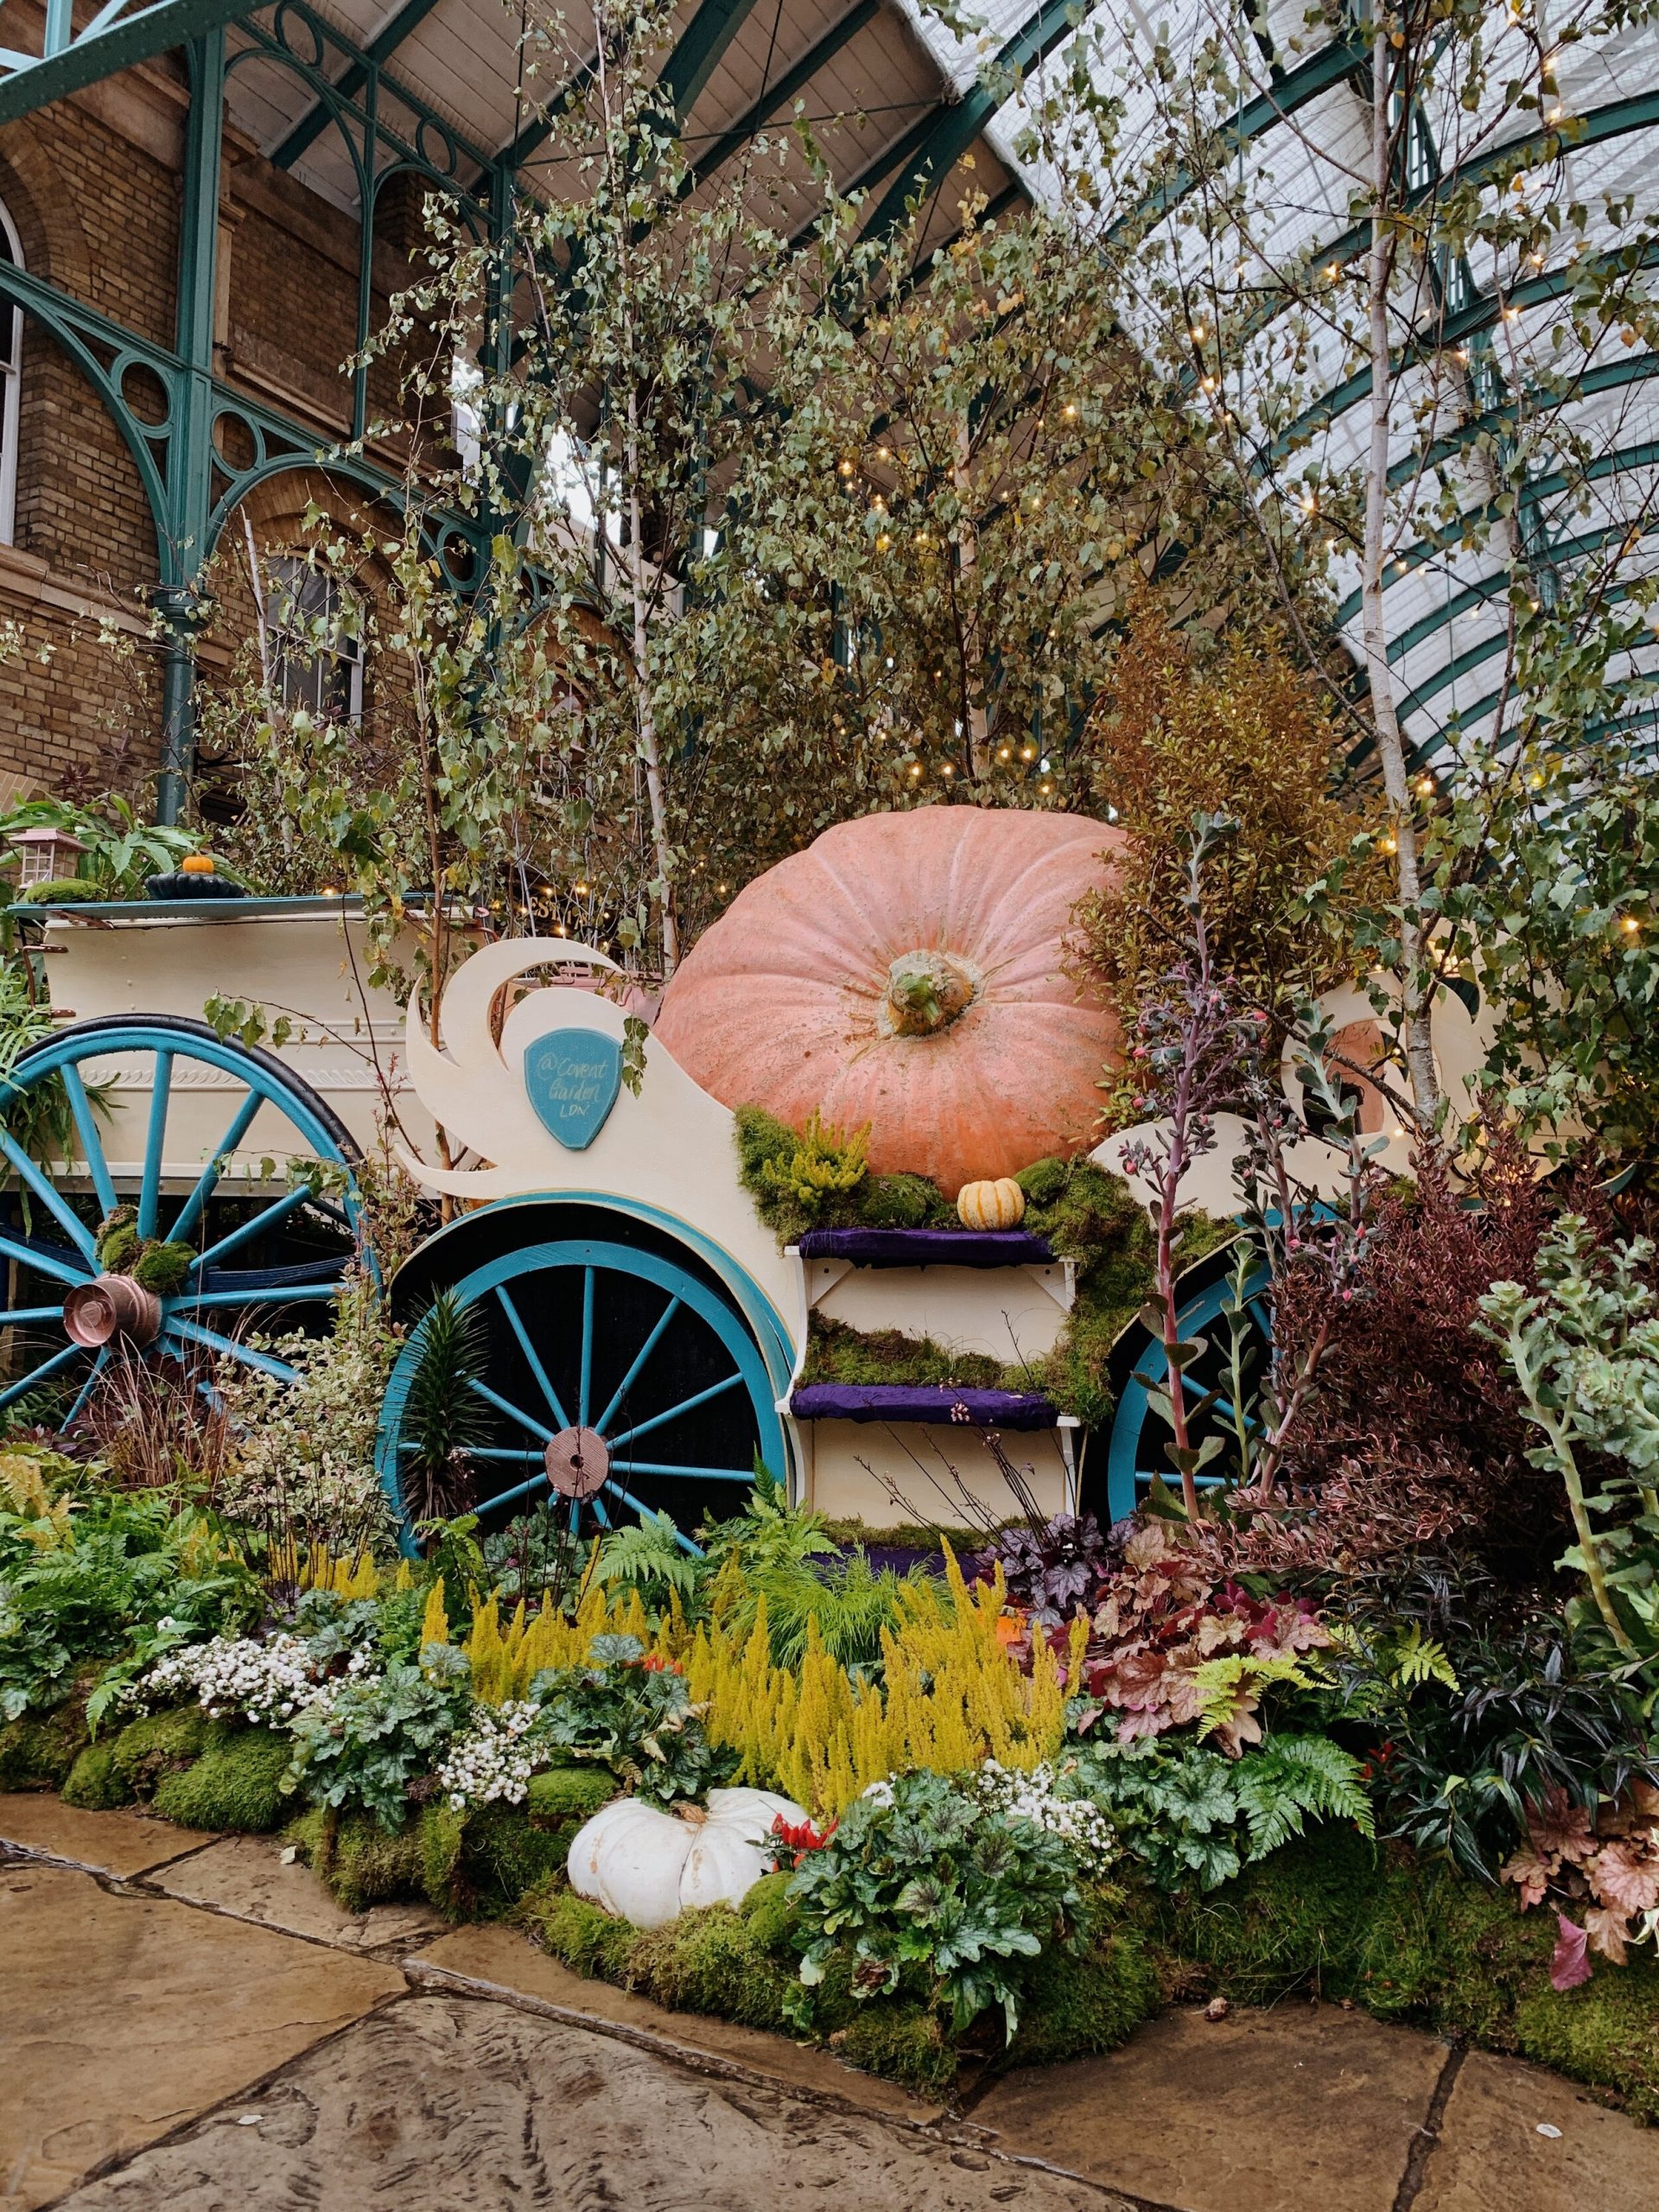 Europe’s largest pumpkin at Old Covent Garden, London.